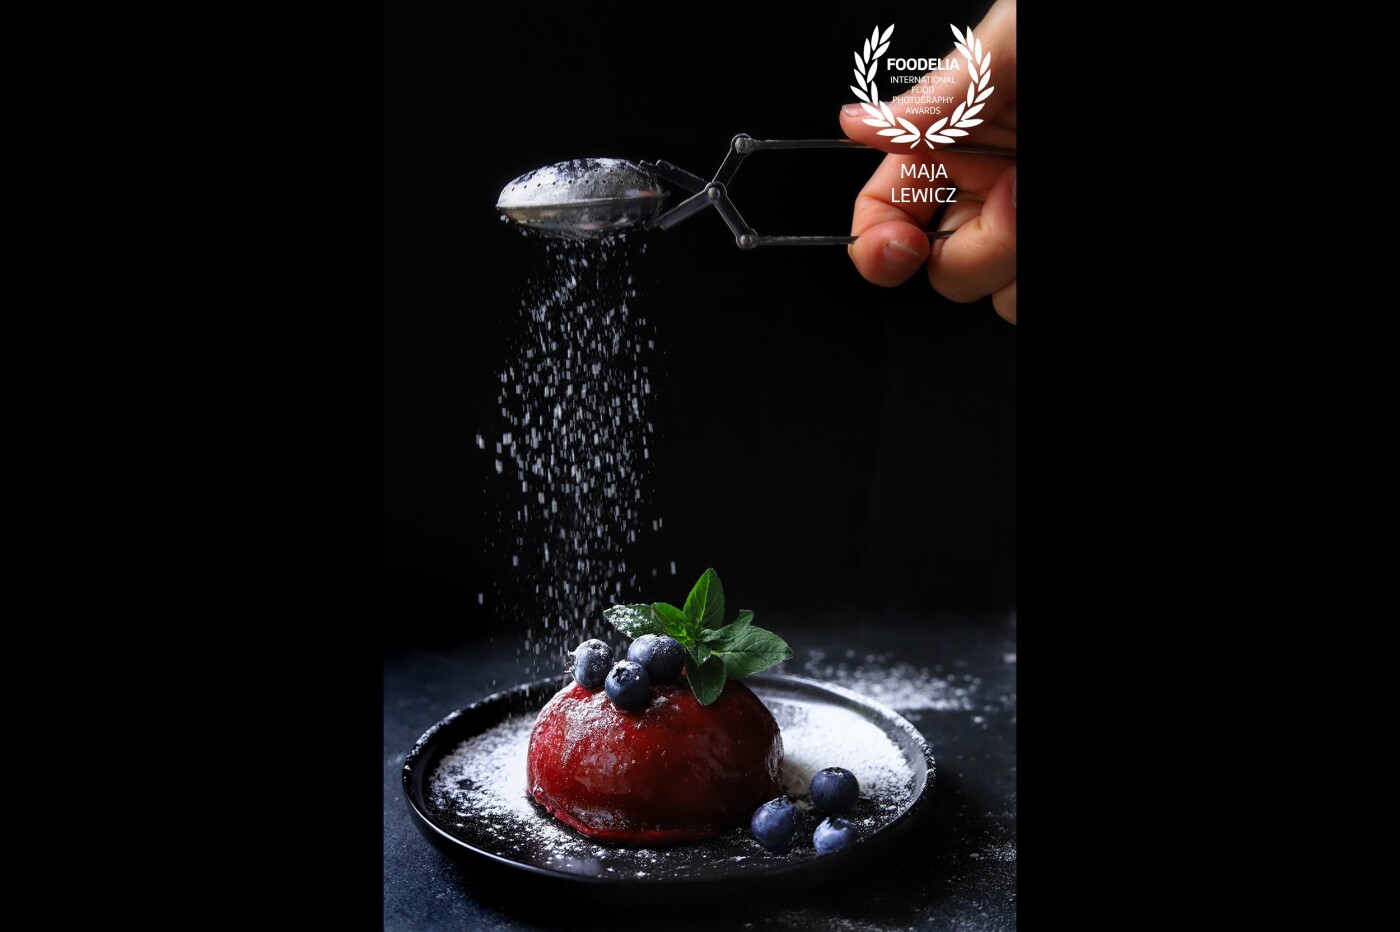 Powdered sugar rain on top of a vegan forest fruit mousse ball. I am a big fan of action shots and using hands in food photography. I believe they bring food to life in a completely new way. An action shot like this one looks more dynamic and natural if the hands are included, adding, at the same time, so much to the storytelling, don't you think?